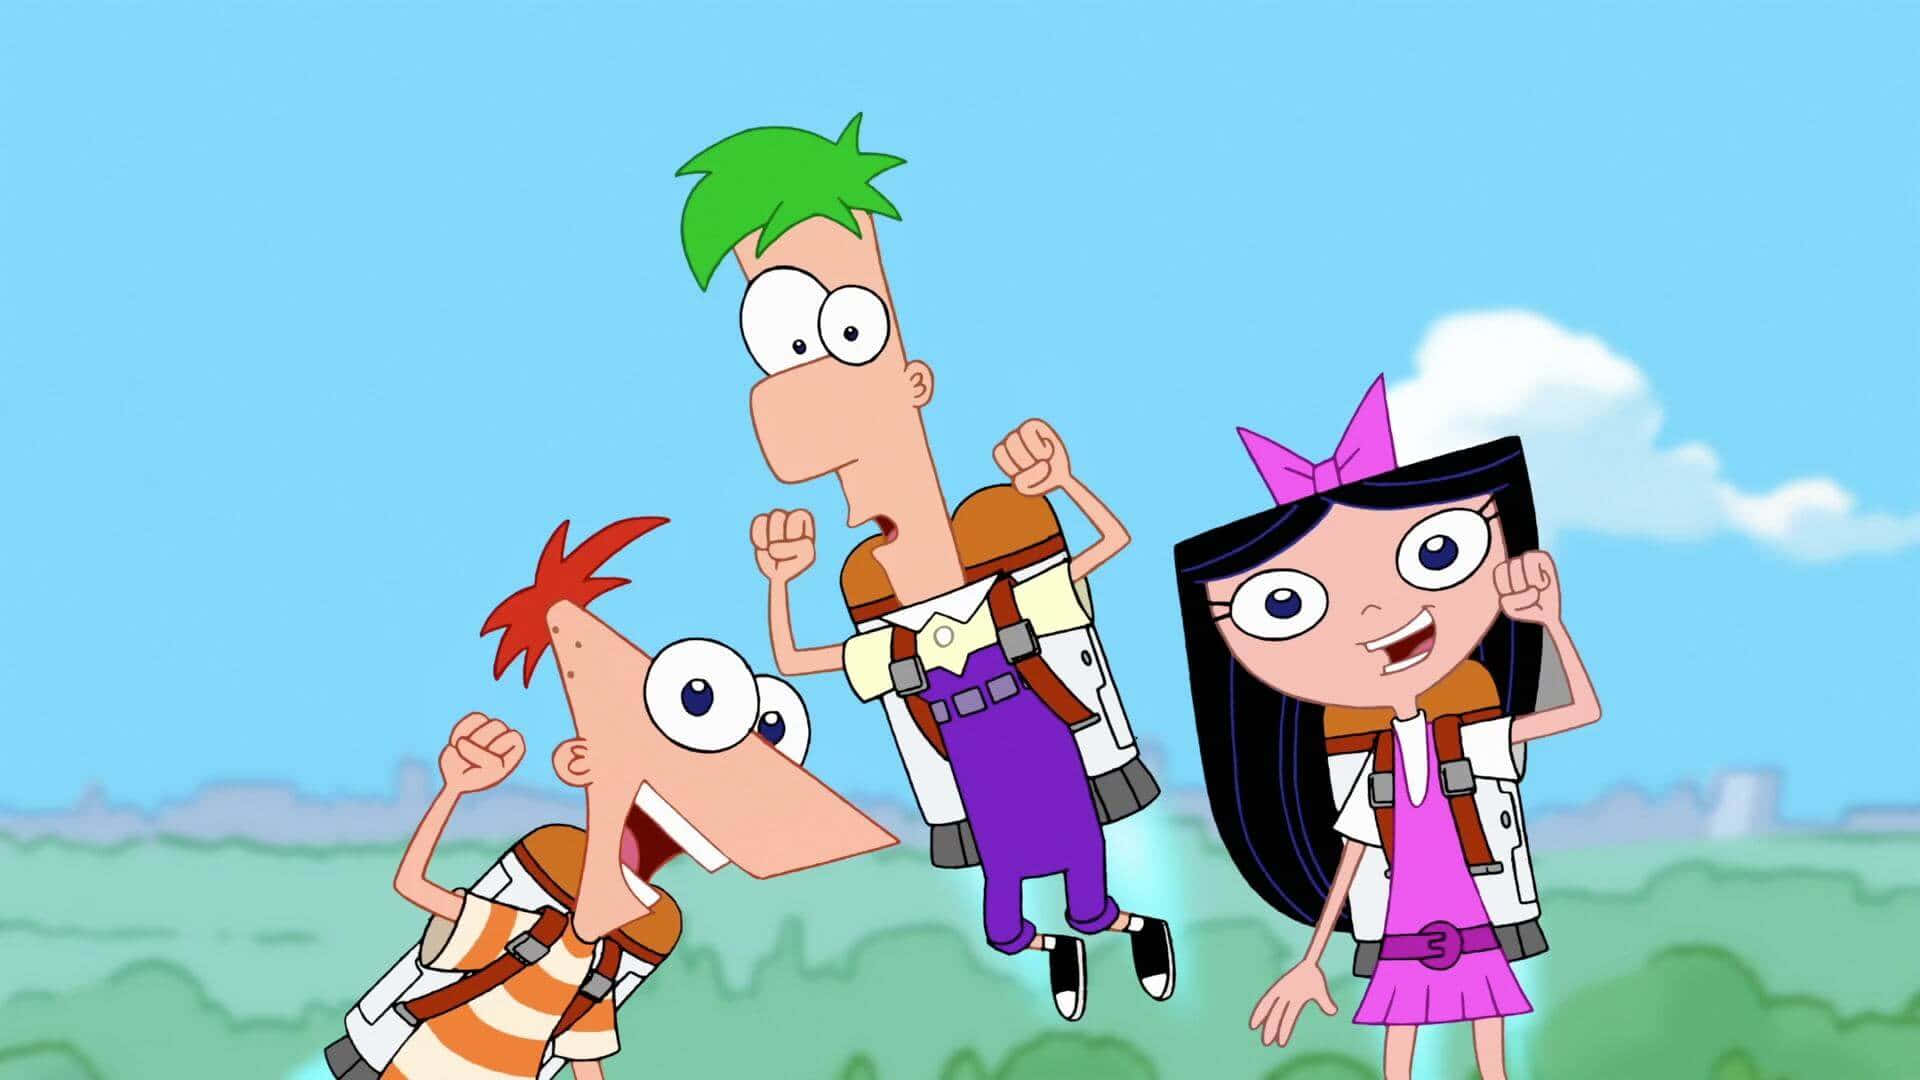 Phineas and Ferb enjoying a fun adventure together in their colorful world.